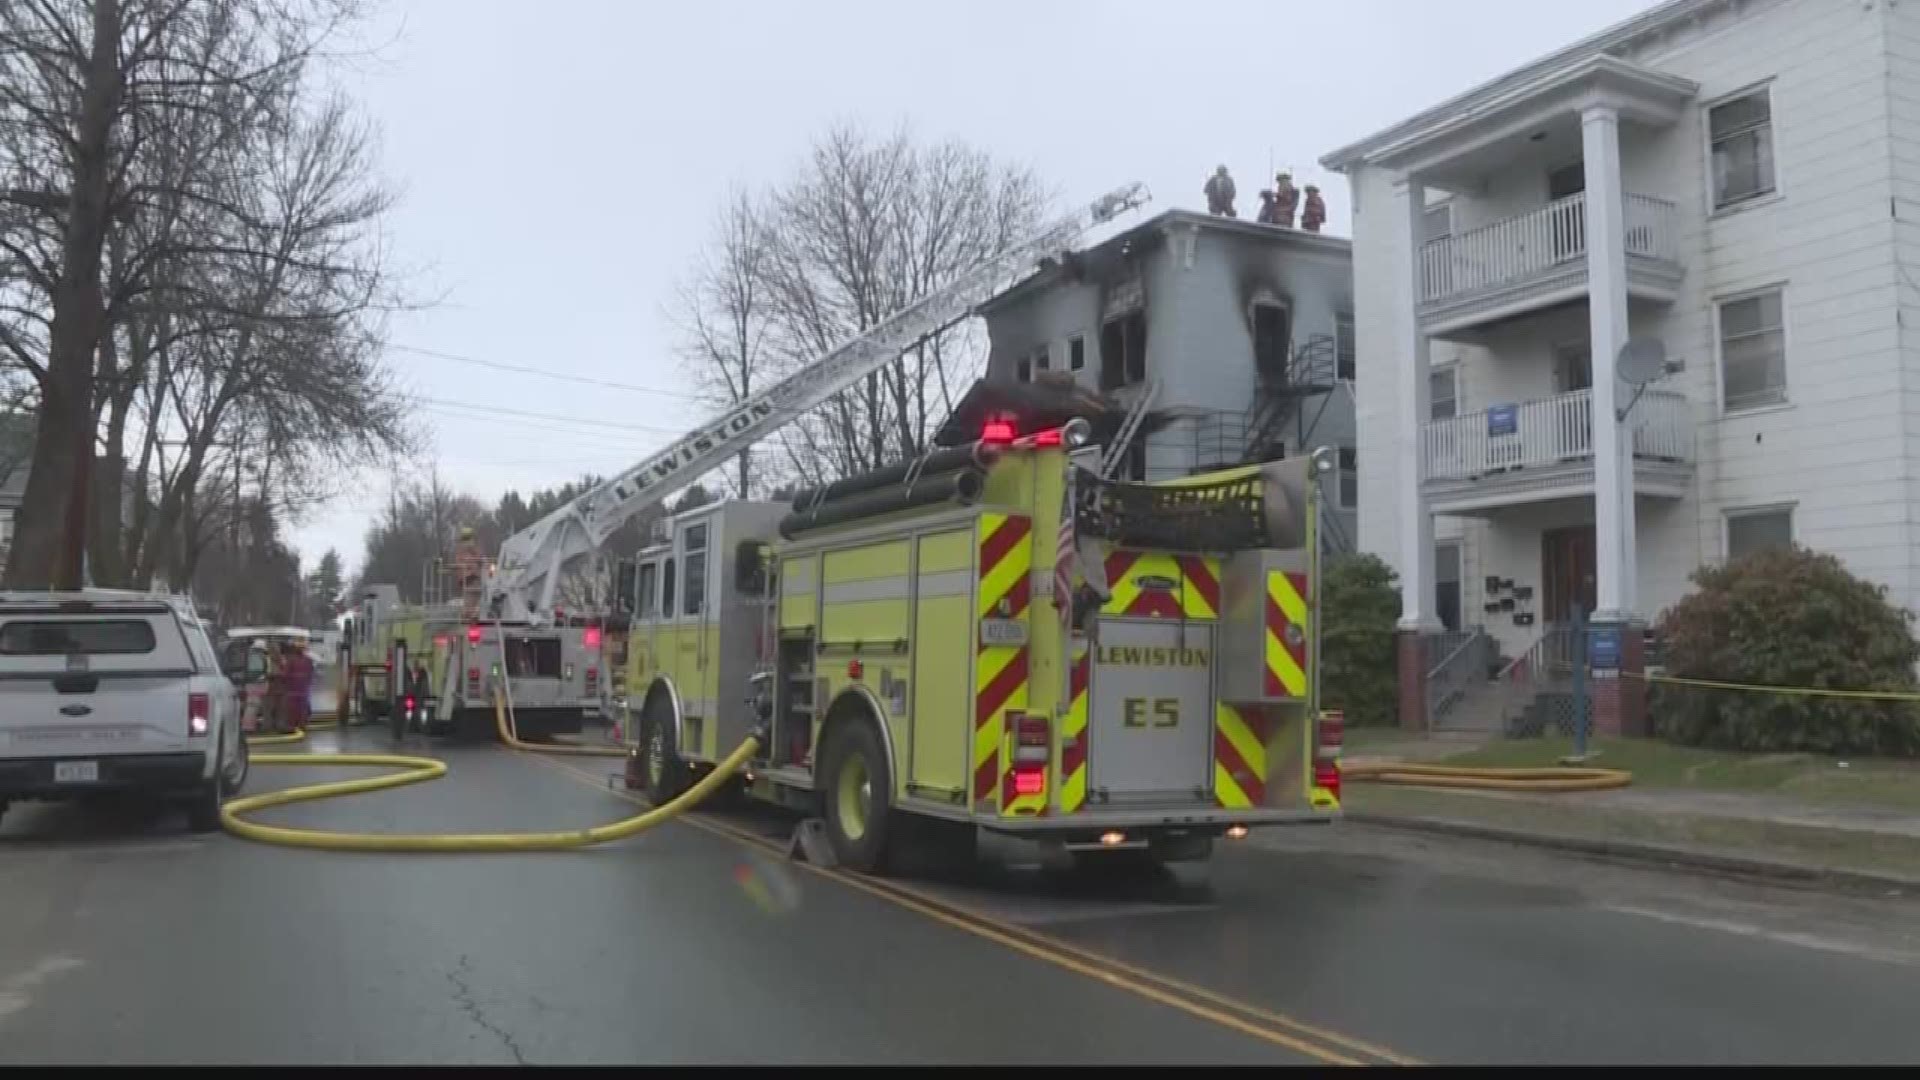 A Lewiston fire investigator says yesterday's fire was sparked by a marijuana grow operation - and it's the third time in the last few years weed has been behind a fire.